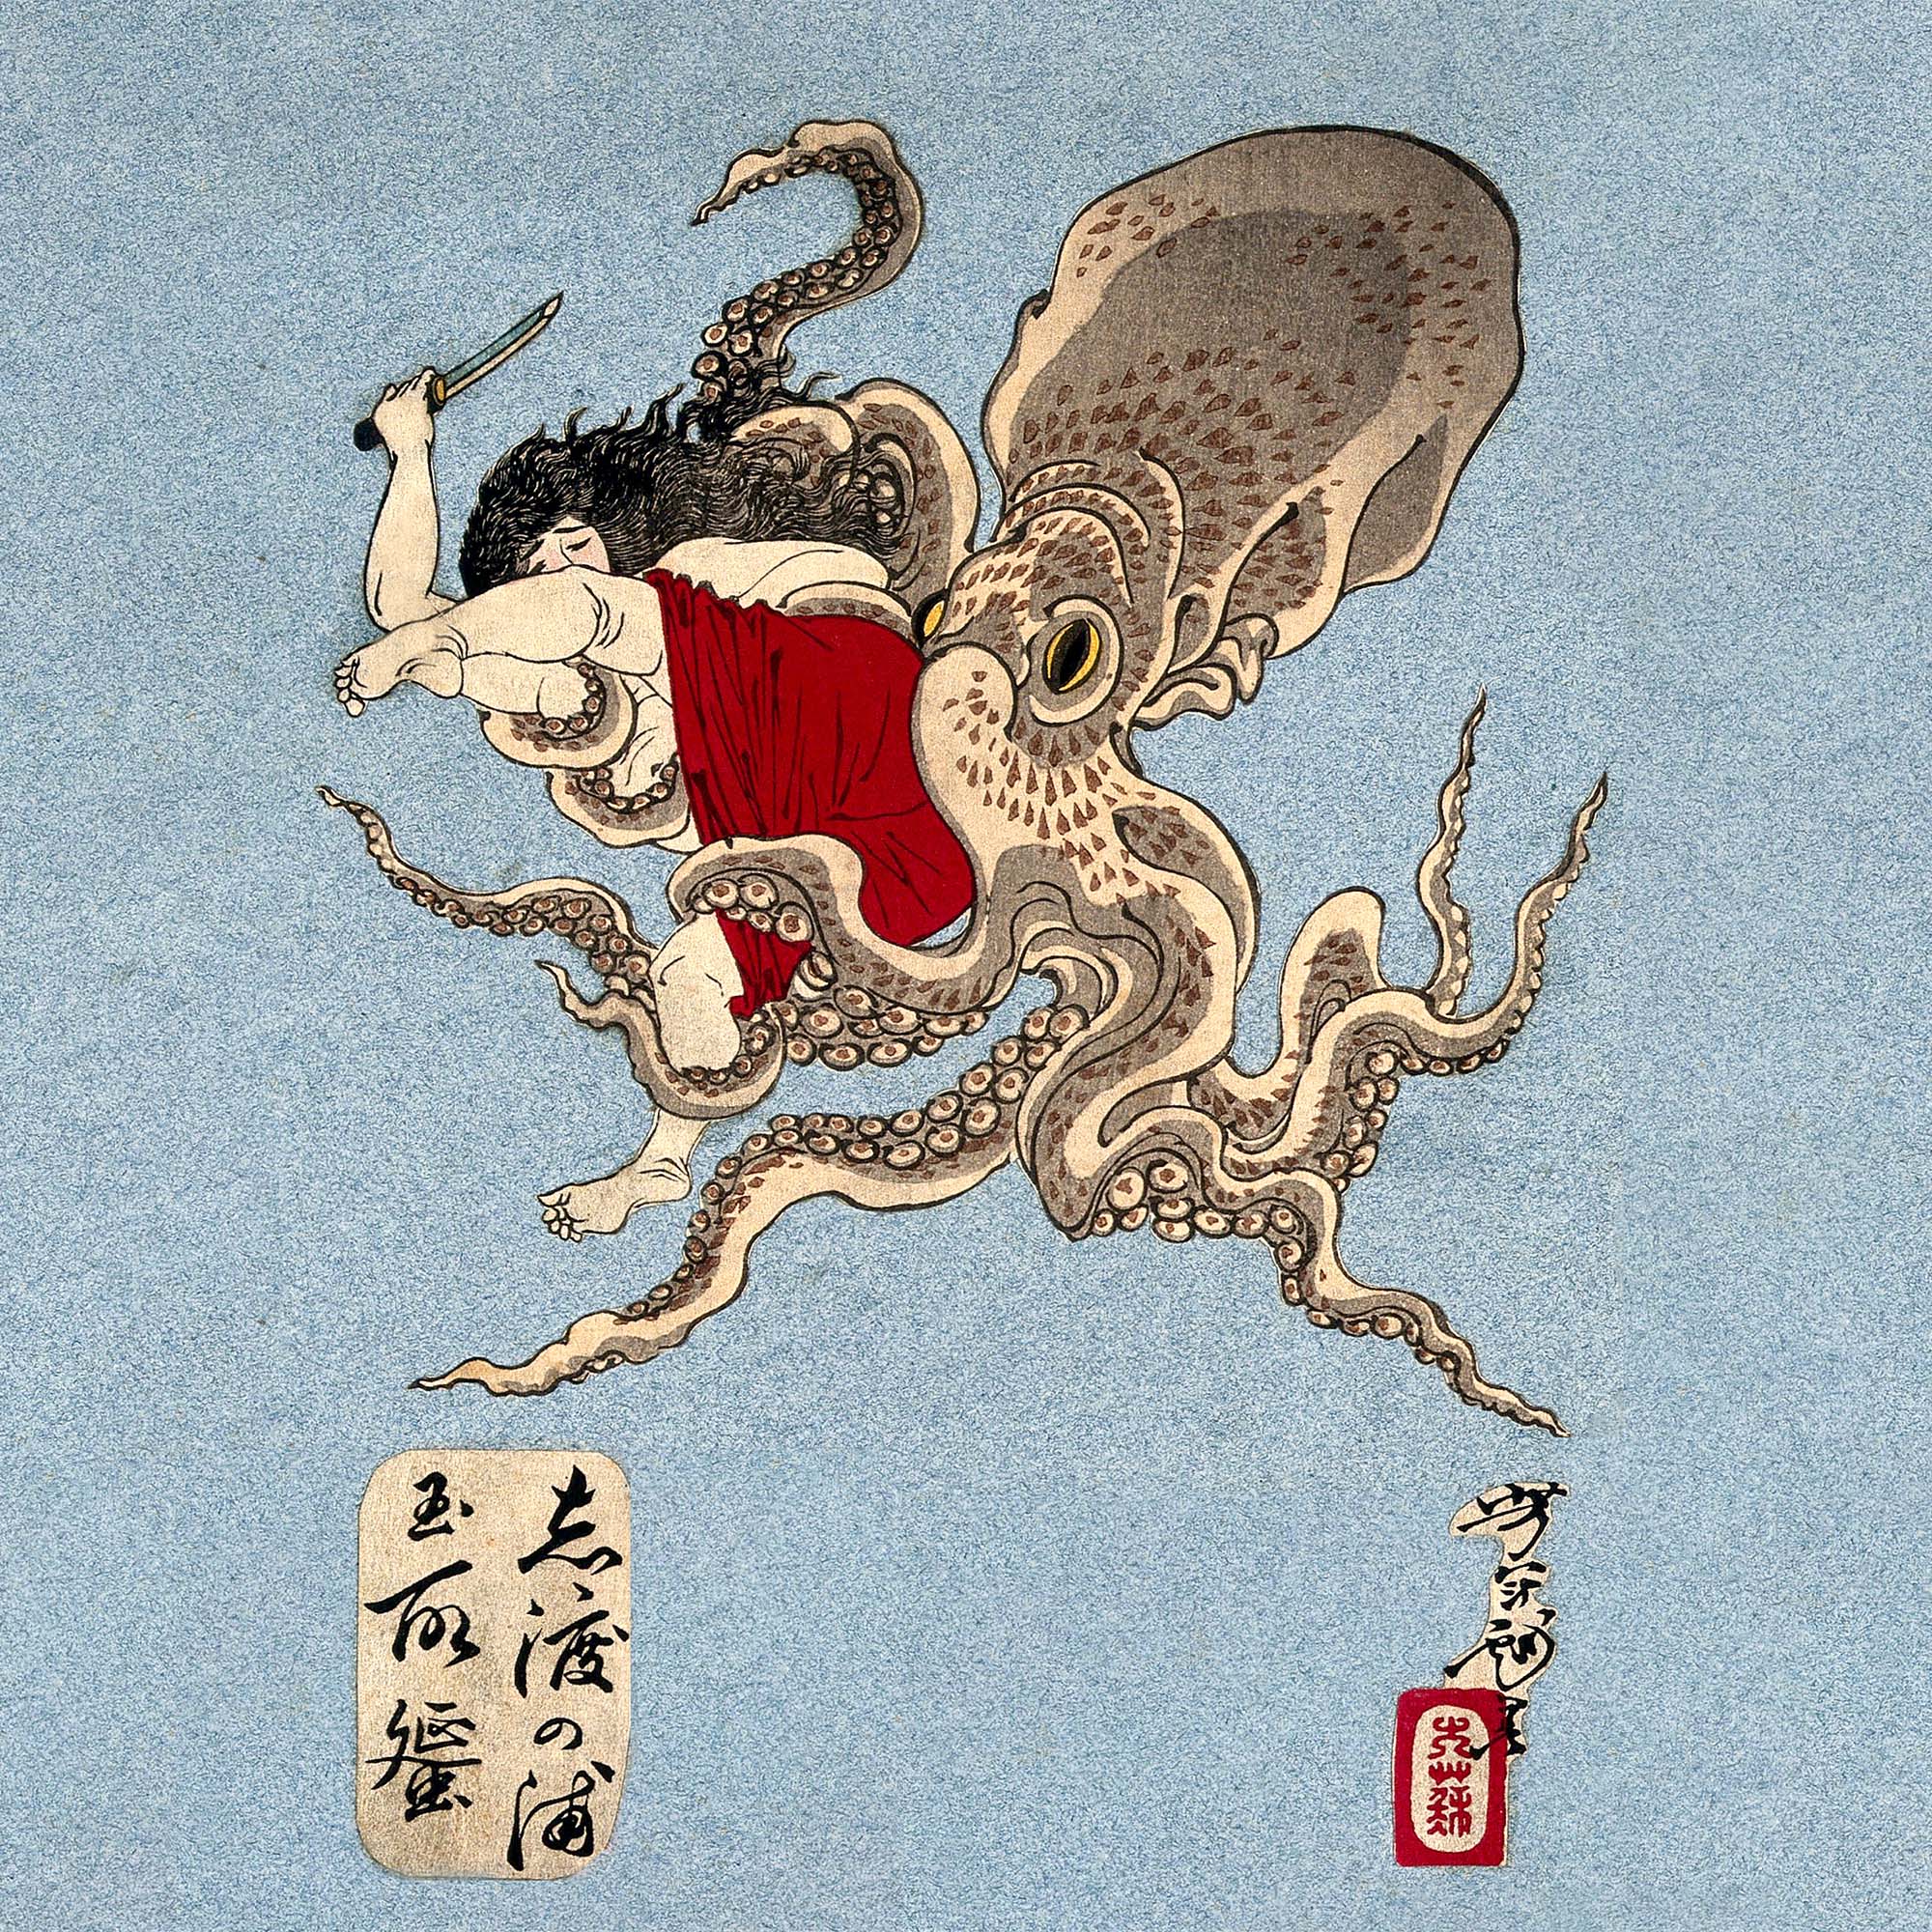 T-shirt XS Woman Battling an Octopus (Yoshitoshi) | "A Collection of Desires" Squid Graphic Art T-Shirt